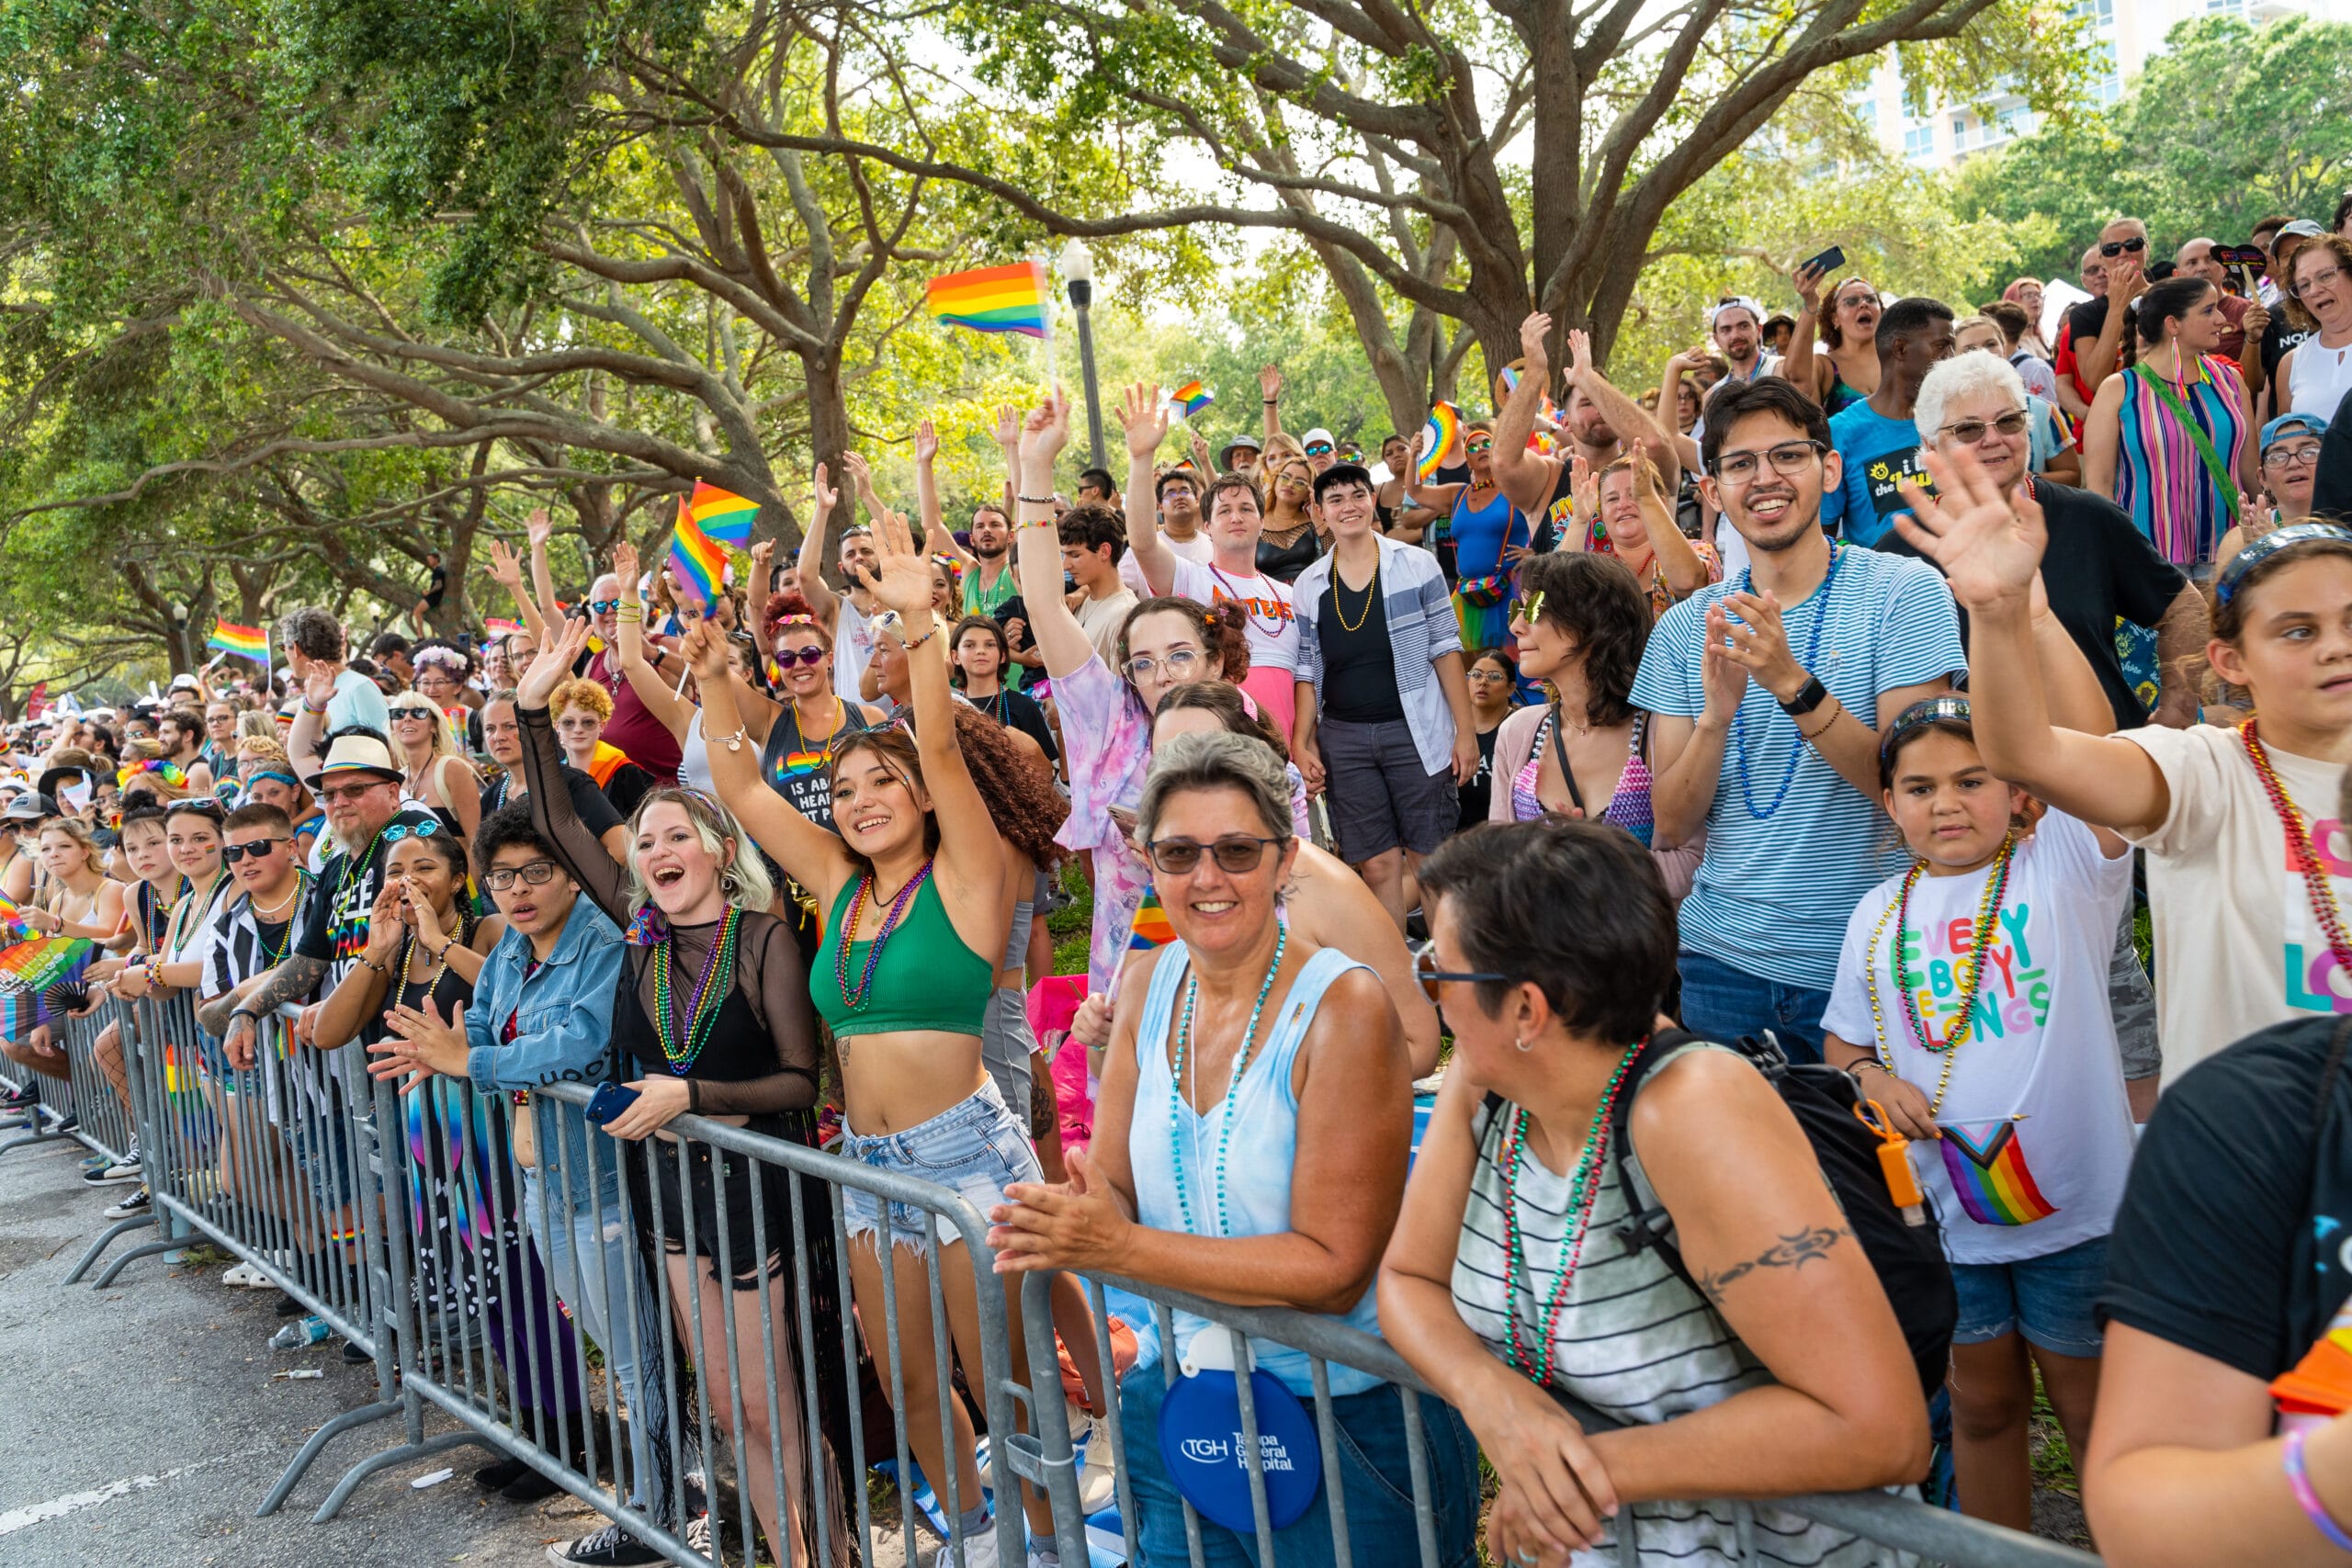 upcoming events in tampa bay - st. pete pride